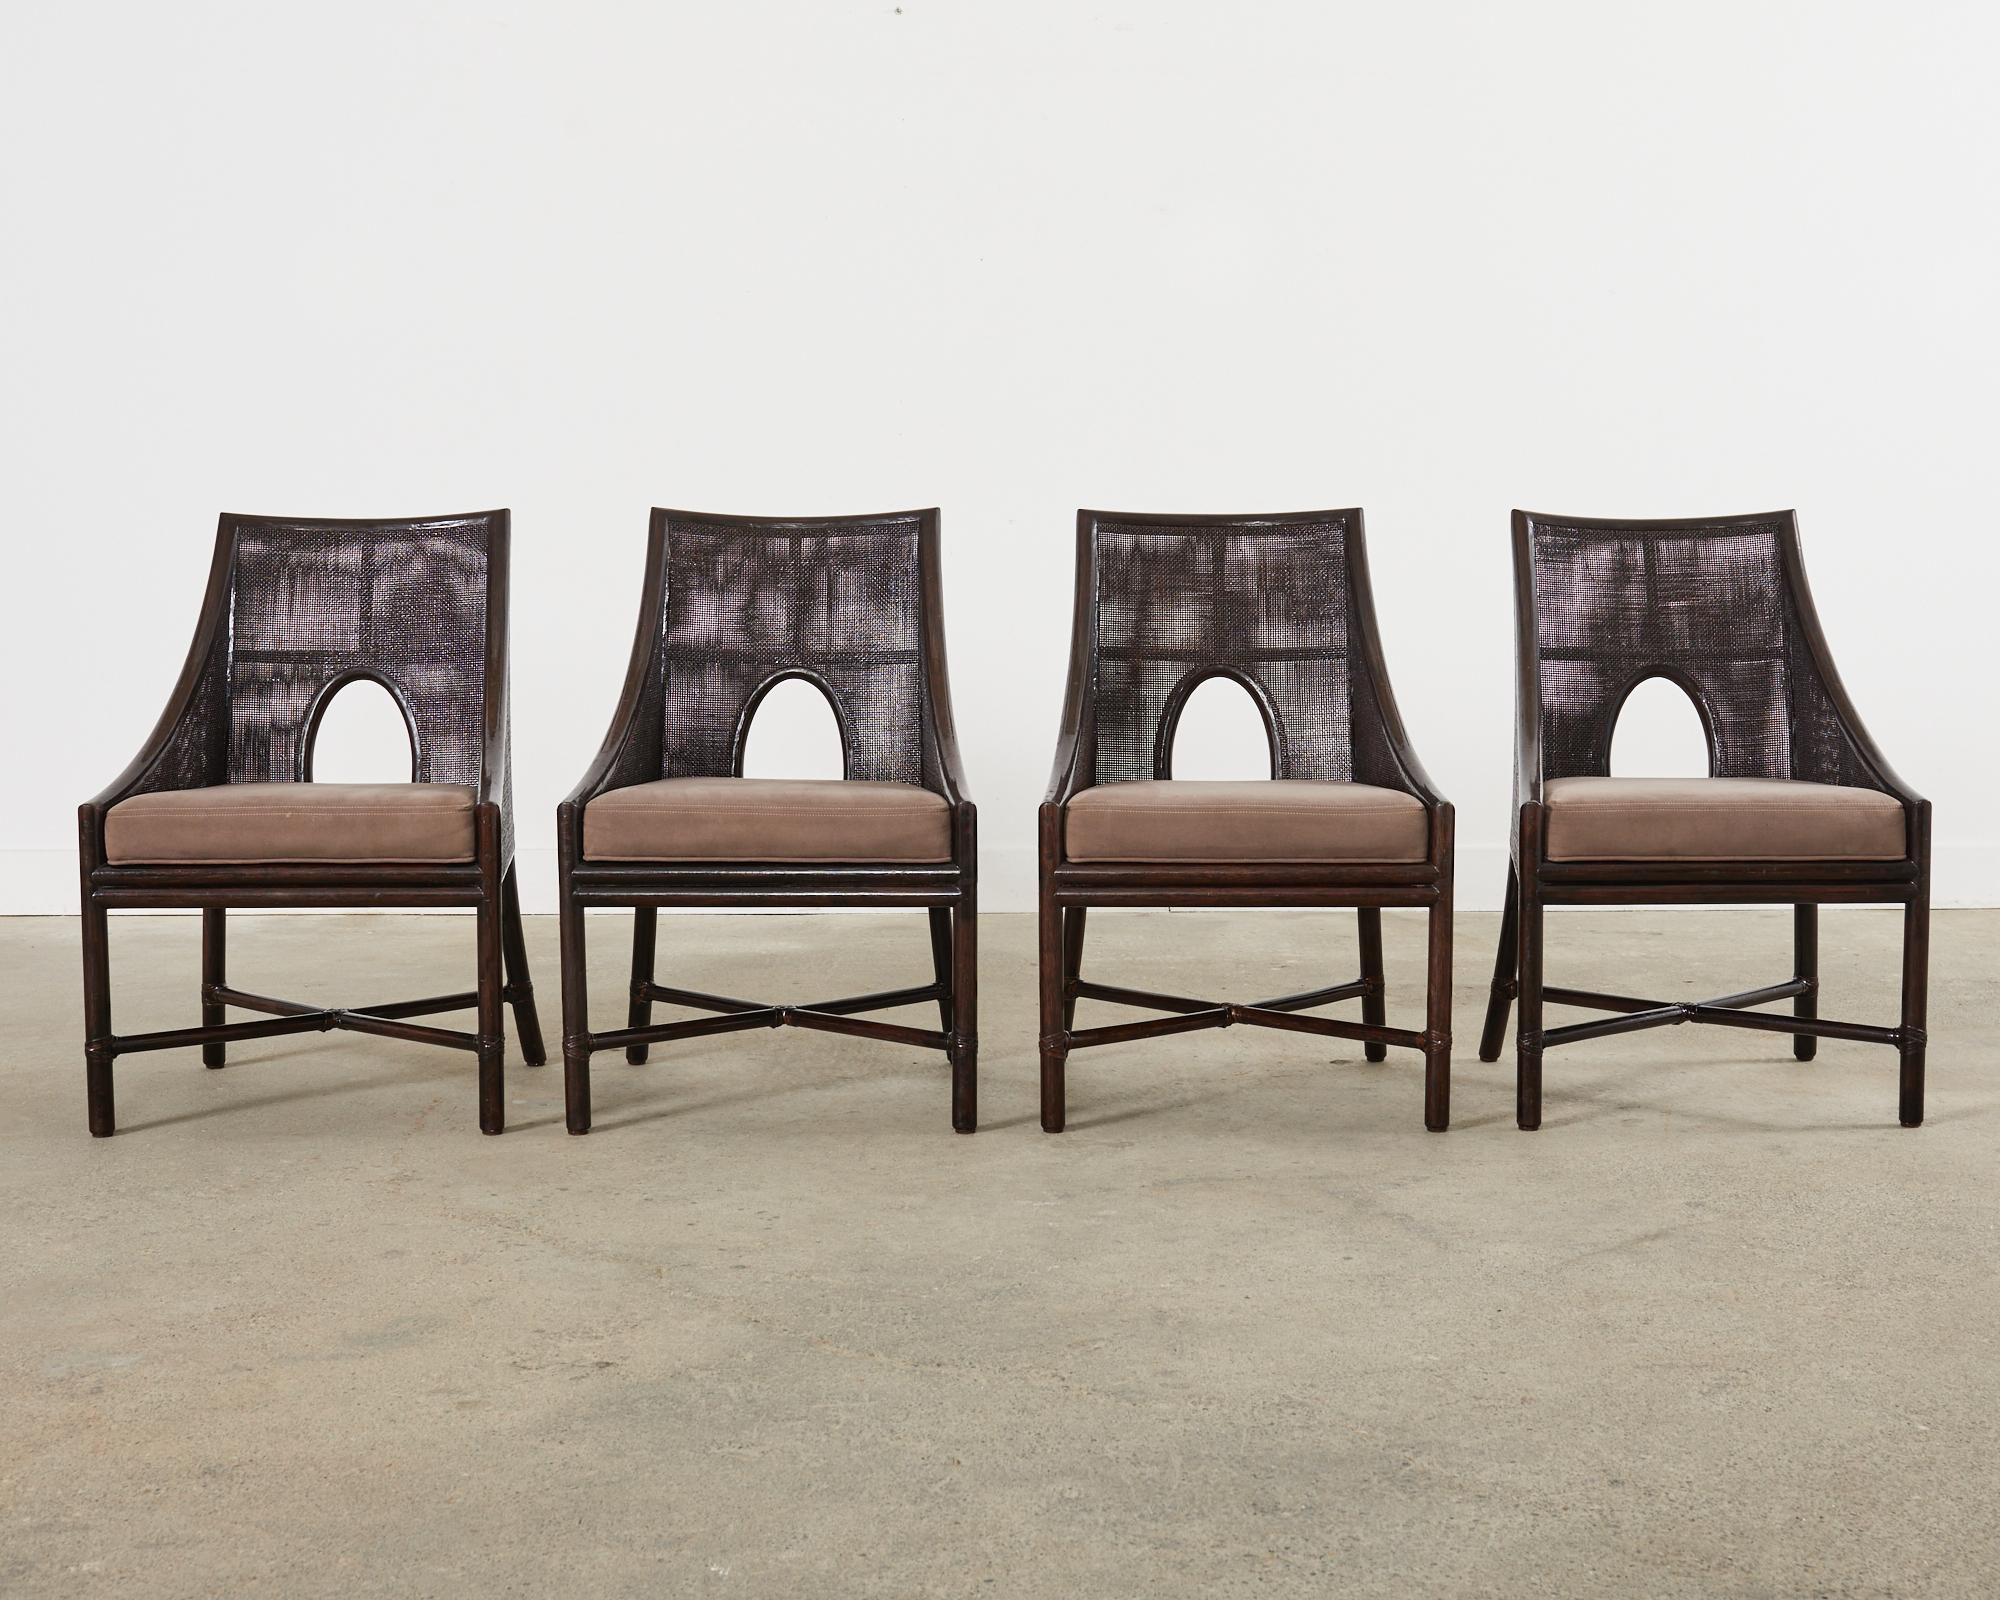 Organic Modern Set of Four Barbara Barry for McGuire Caned Rattan Dining Chairs 